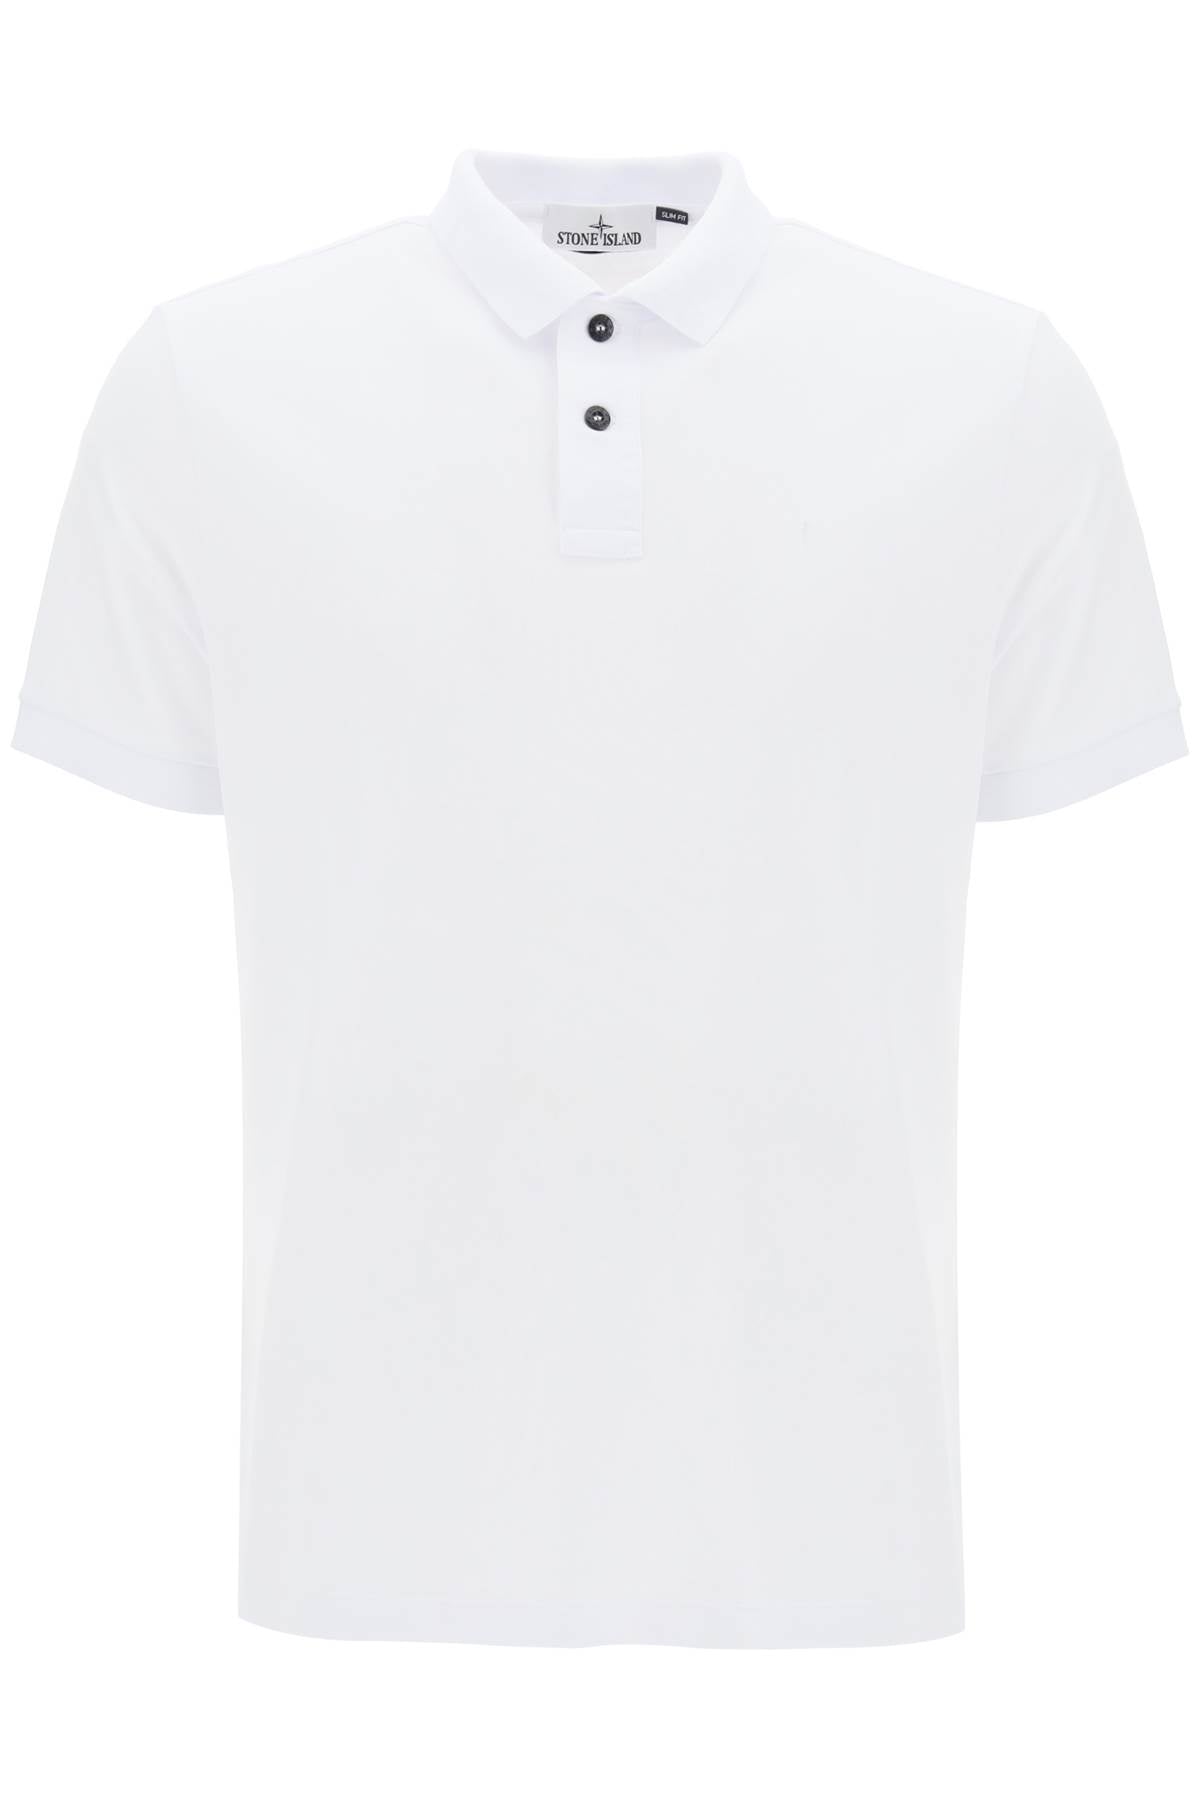 slim fit polo shirt with logo patch 80152SC17 BIANCO